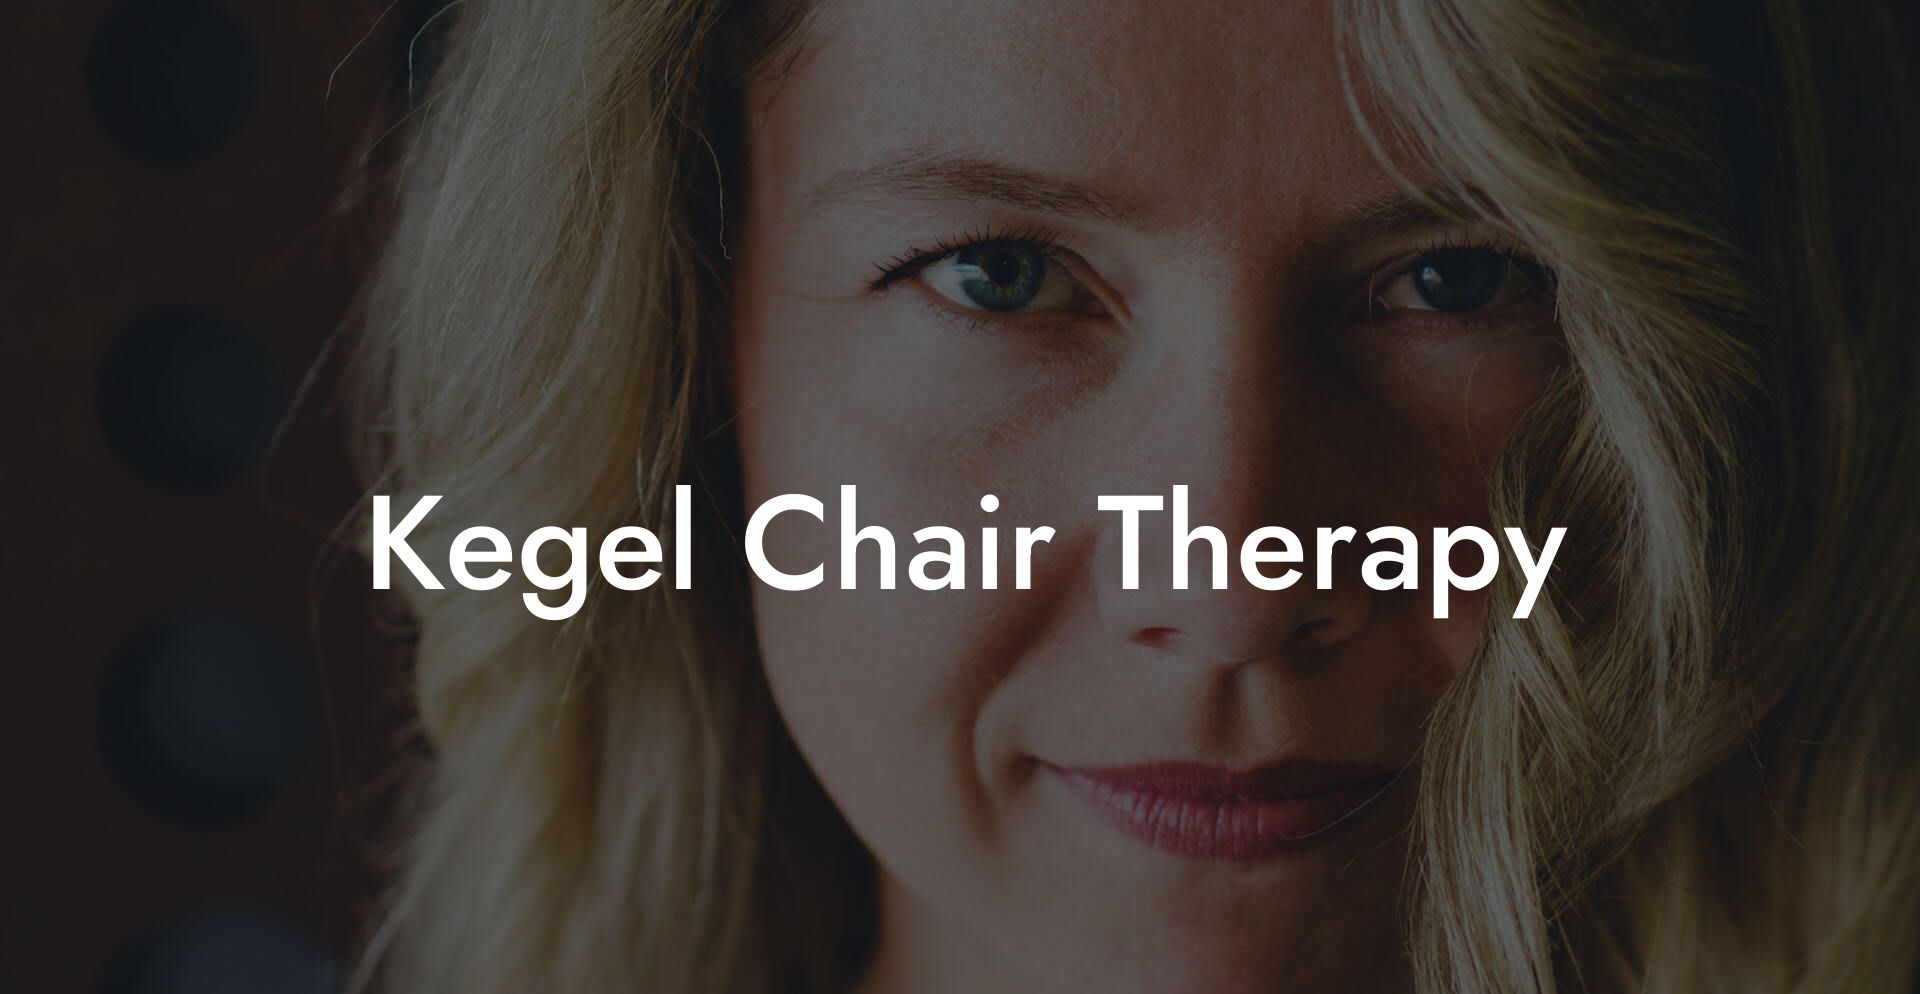 Kegel Chair Therapy